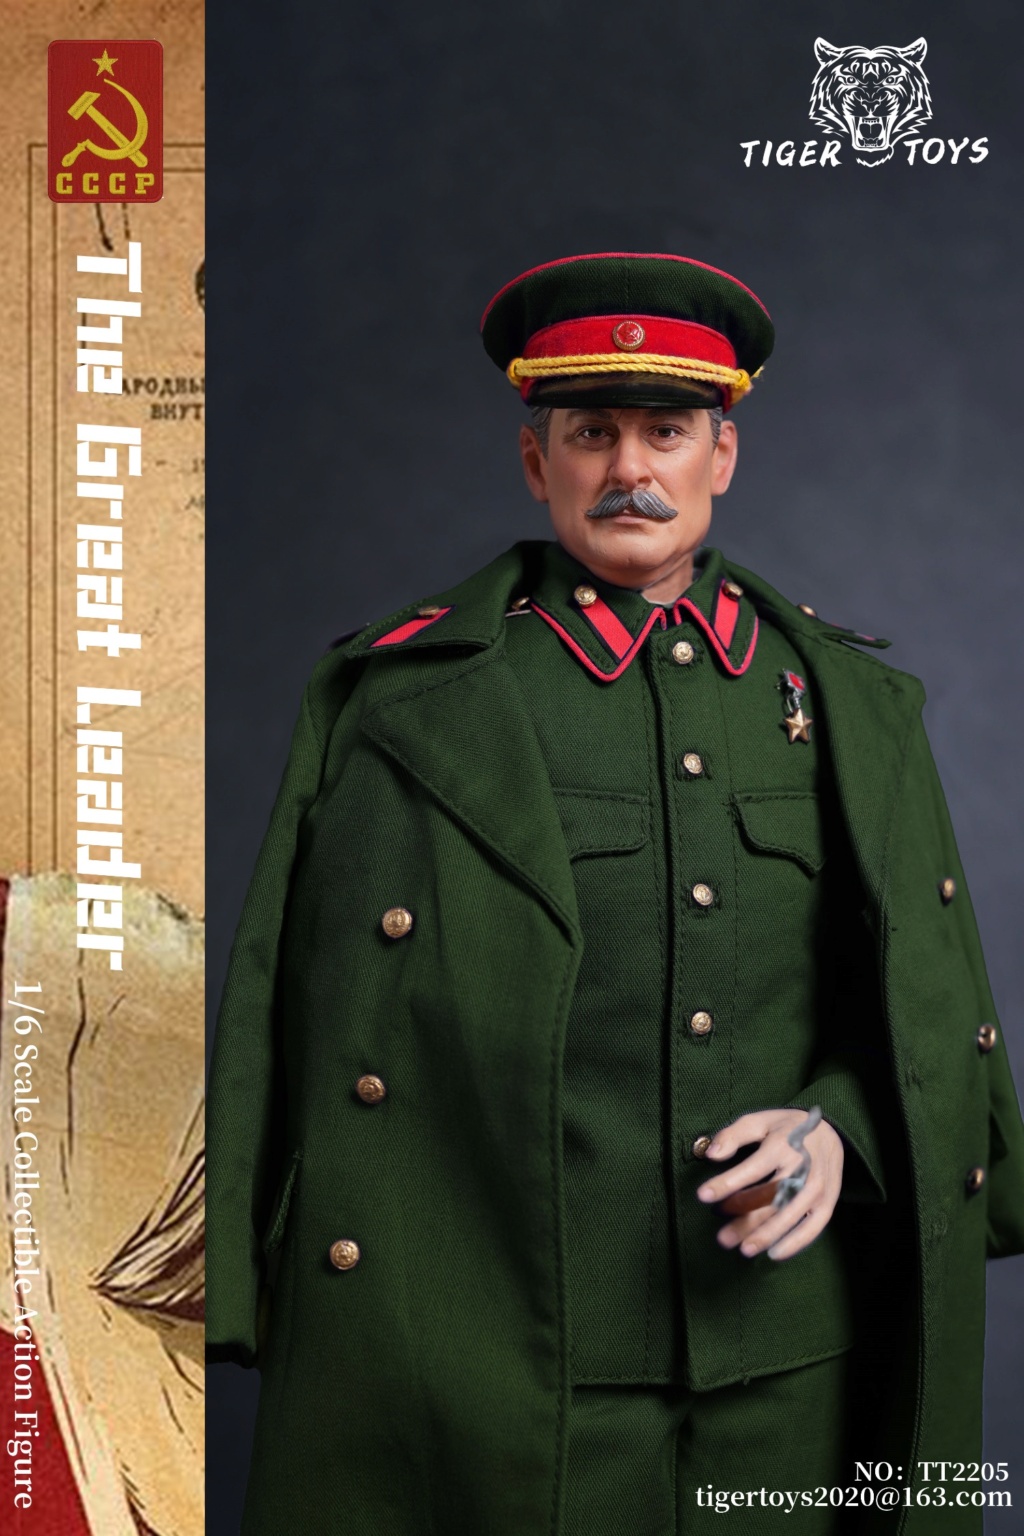 Stalin - NEW PRODUCT: Tigertoys: 1 / 6 scale Soviet leader Stalin 13565910